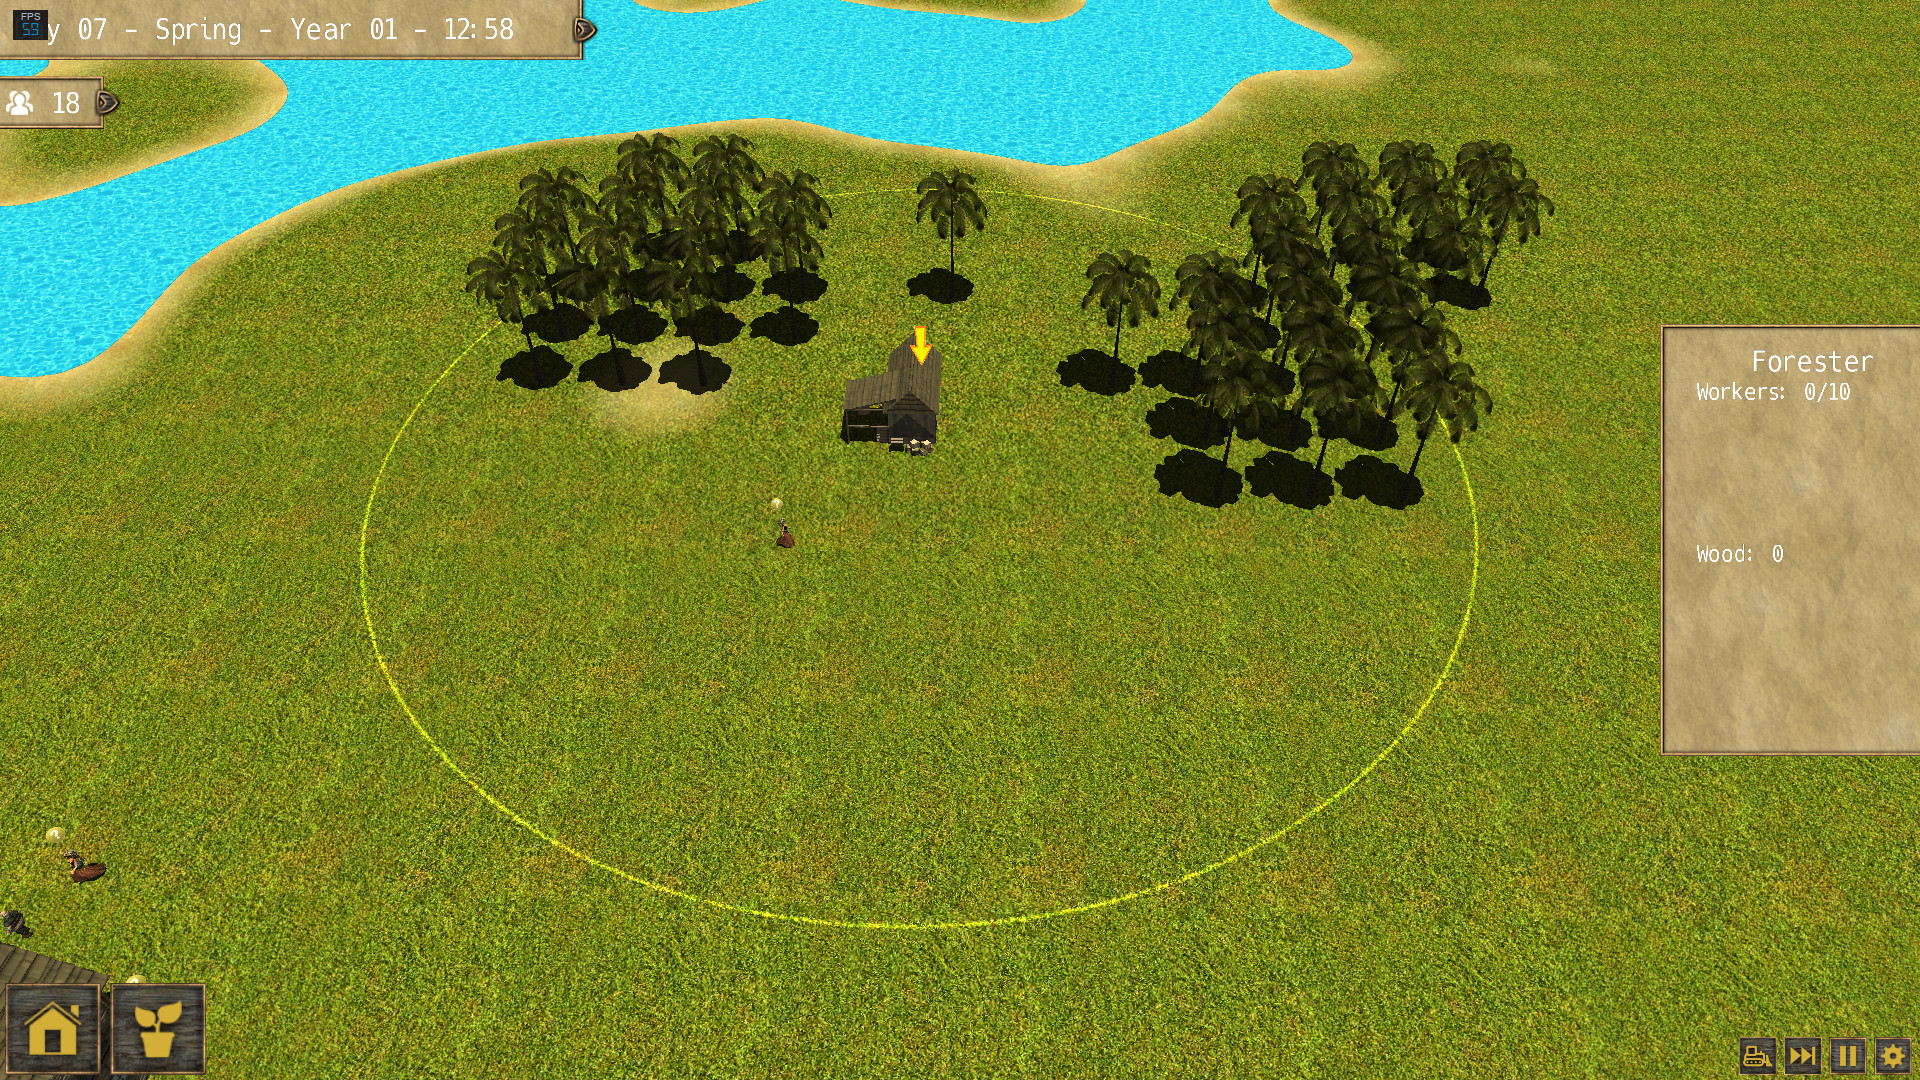 colony survival game how to employ people